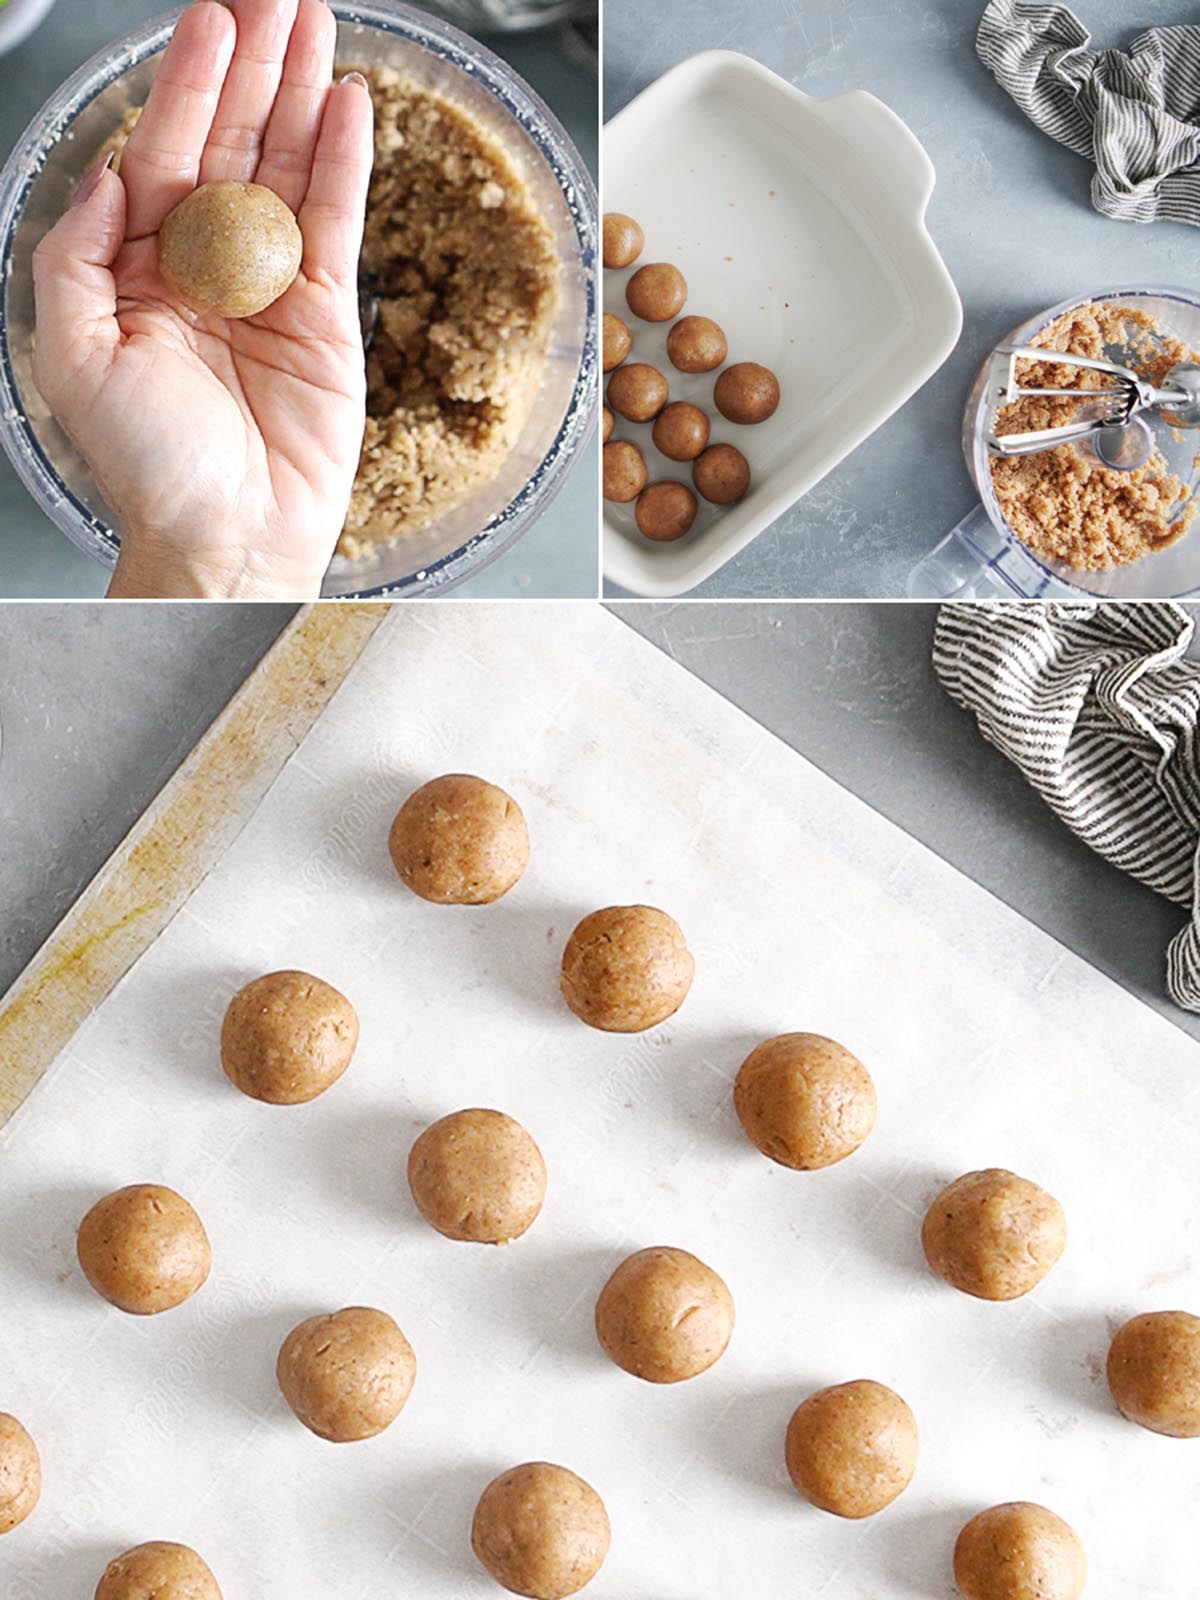 Making cookie dough balls by hand.